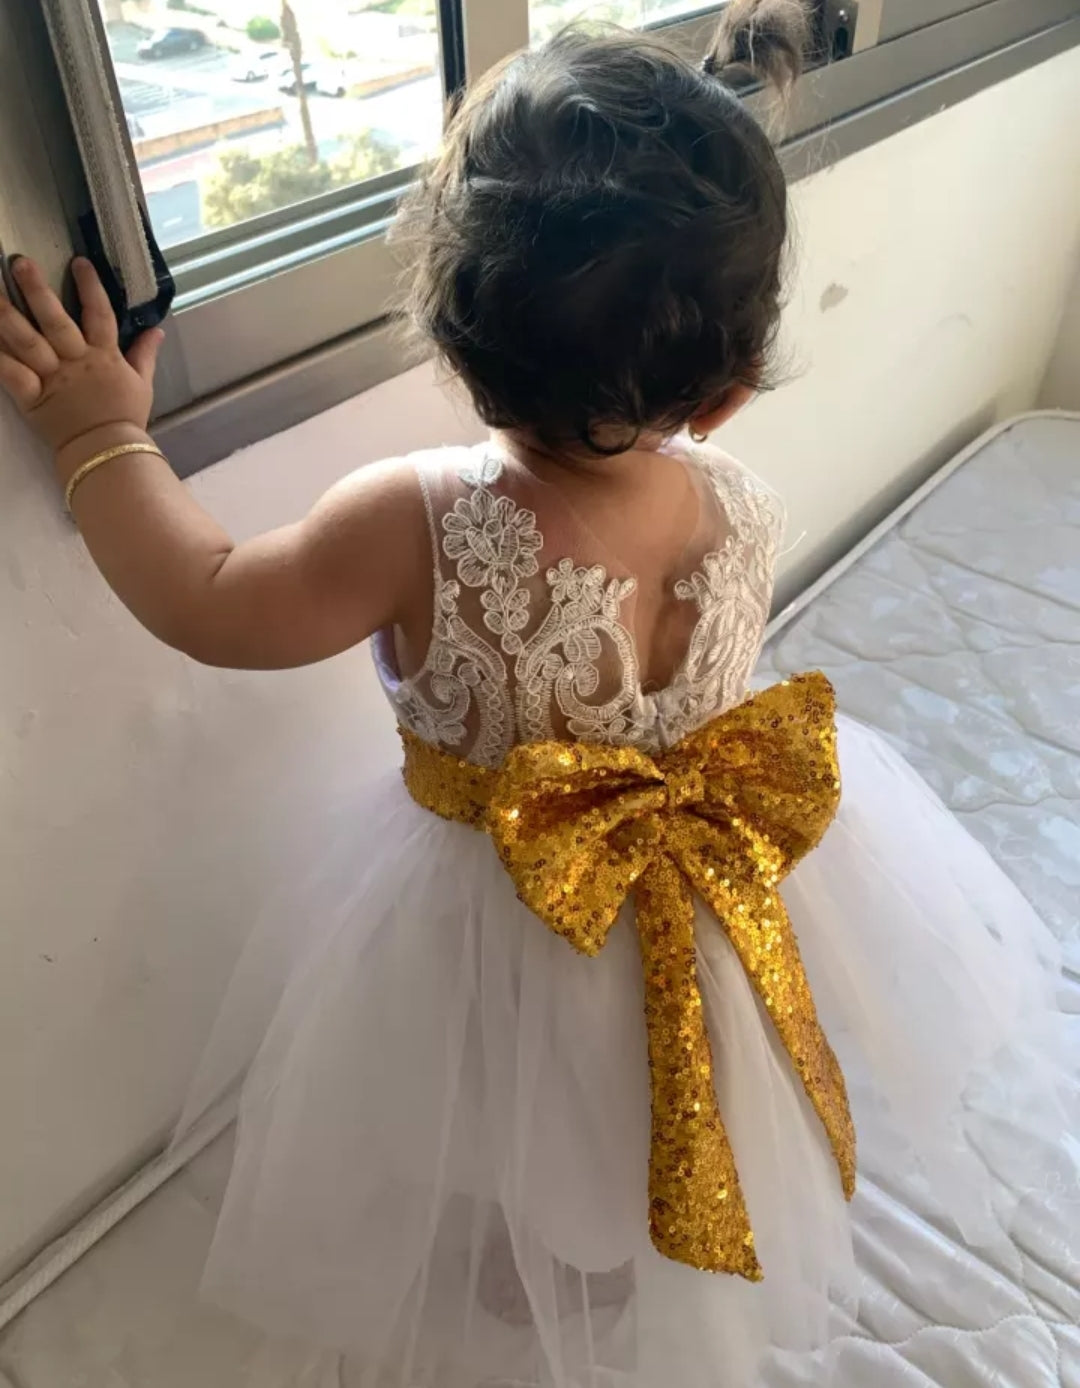 White Lace Tutu Dress with Gold Sequins Bow